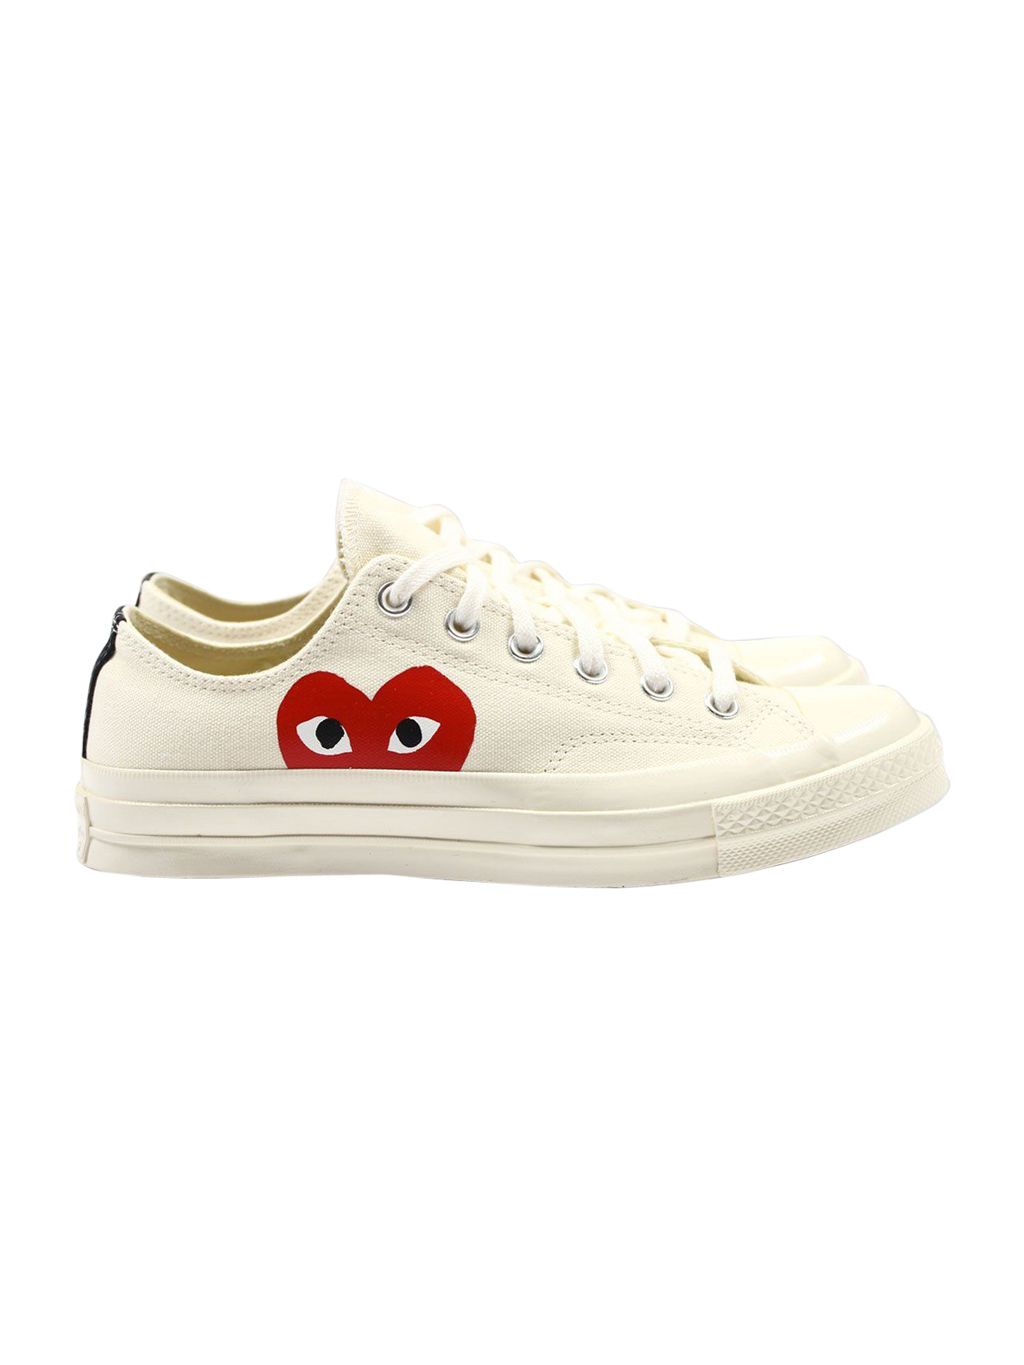 converse with red hearts